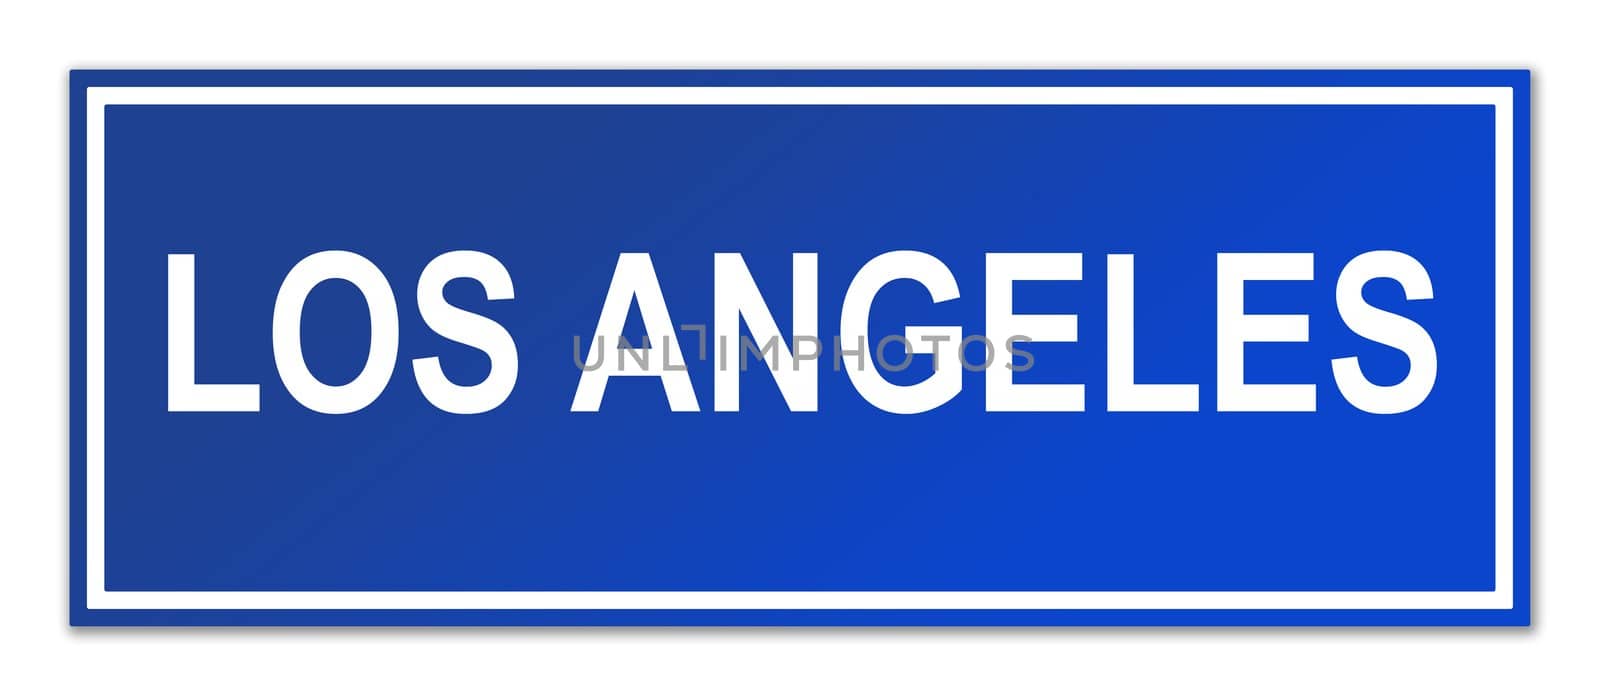 Los Angeles street sign by speedfighter